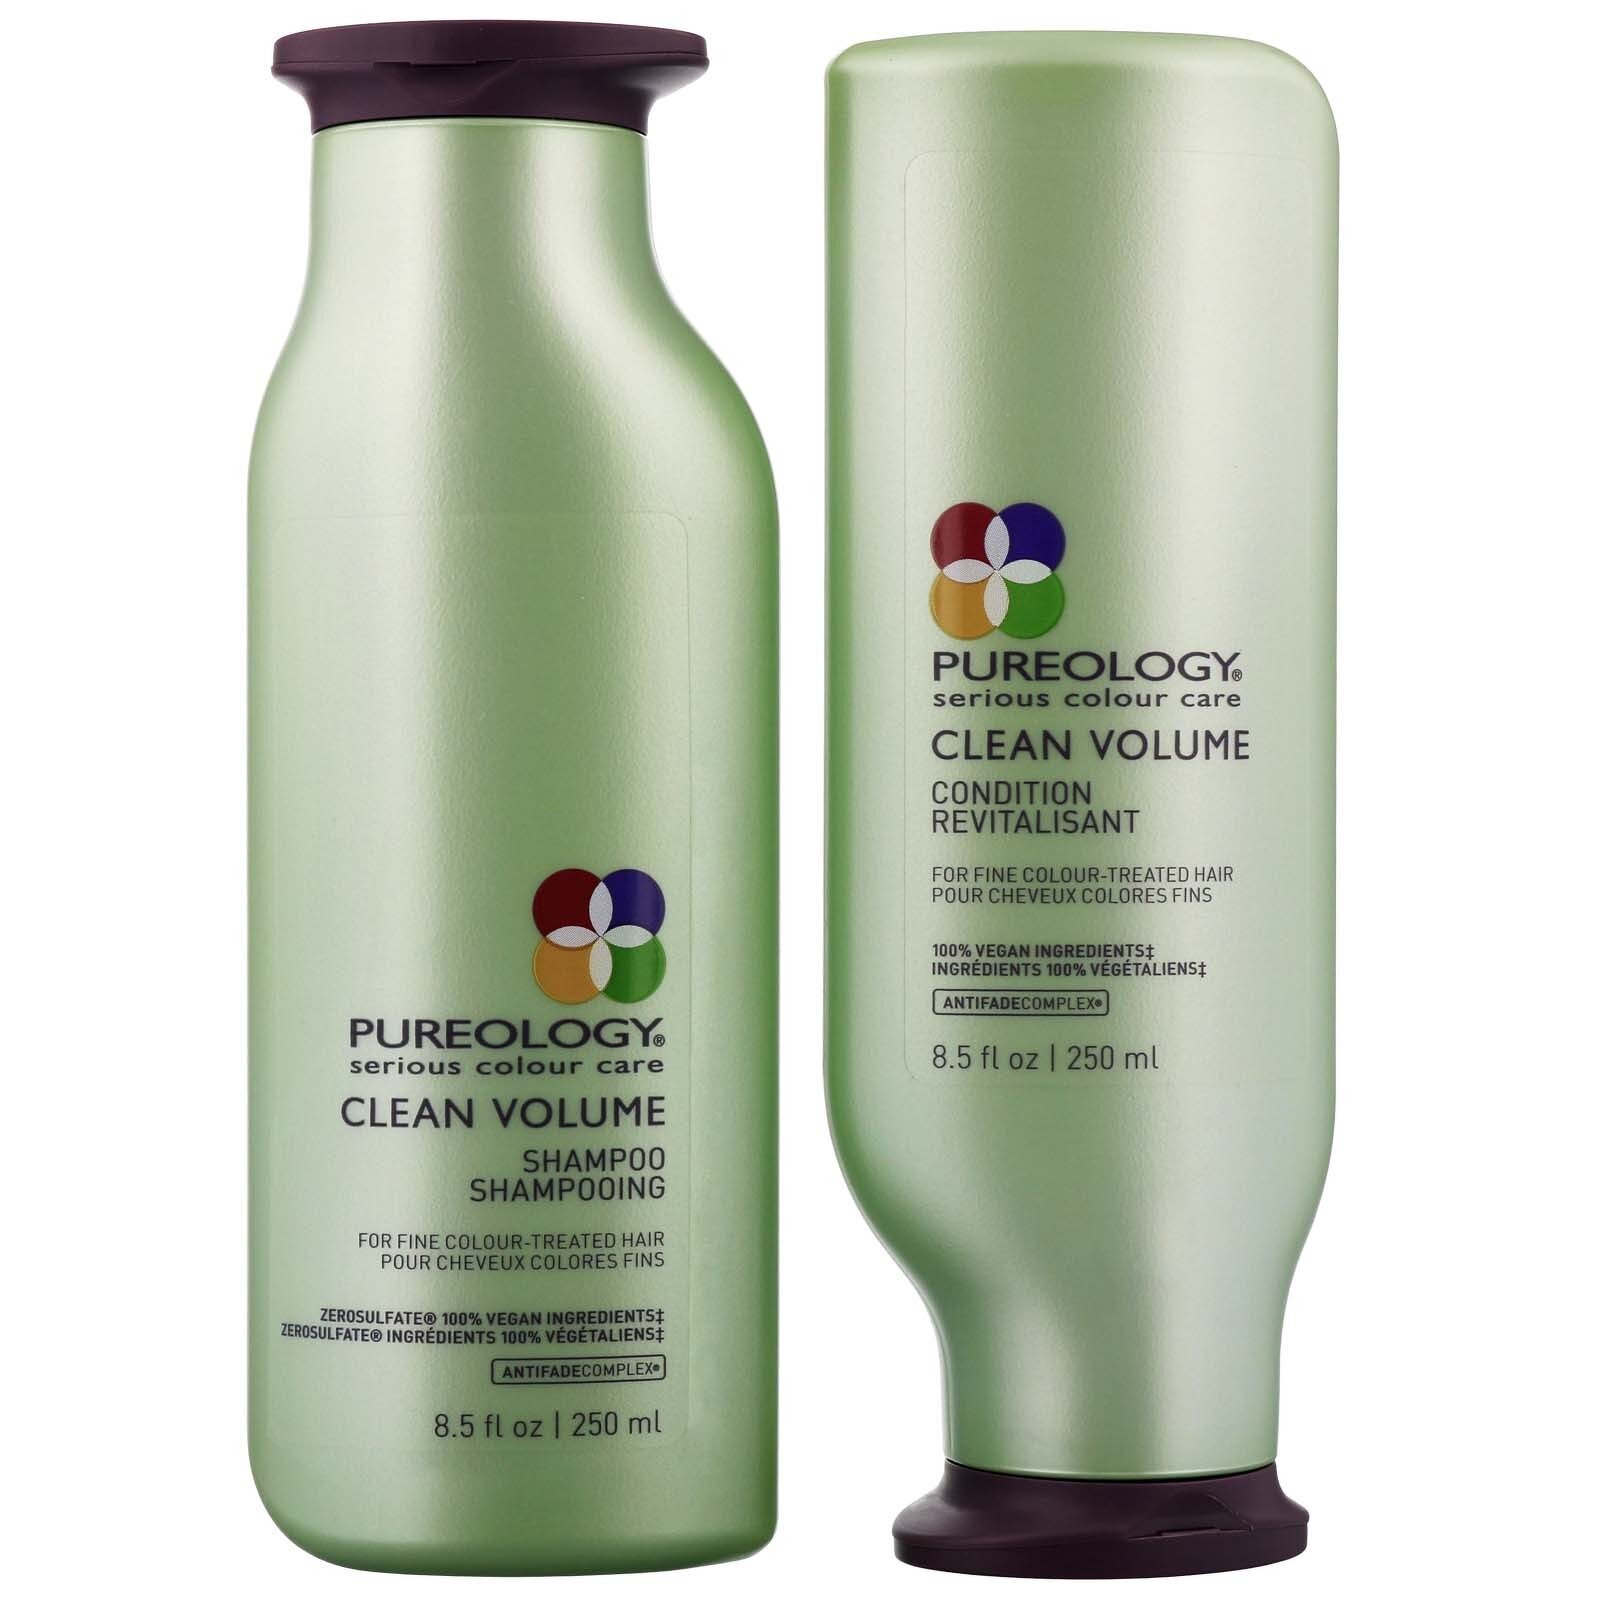 1191345-pureology-clean-volume-duo-set-shampoo-250ml-conditioner-250ml-for-fine-colour-treated-hair.jpg